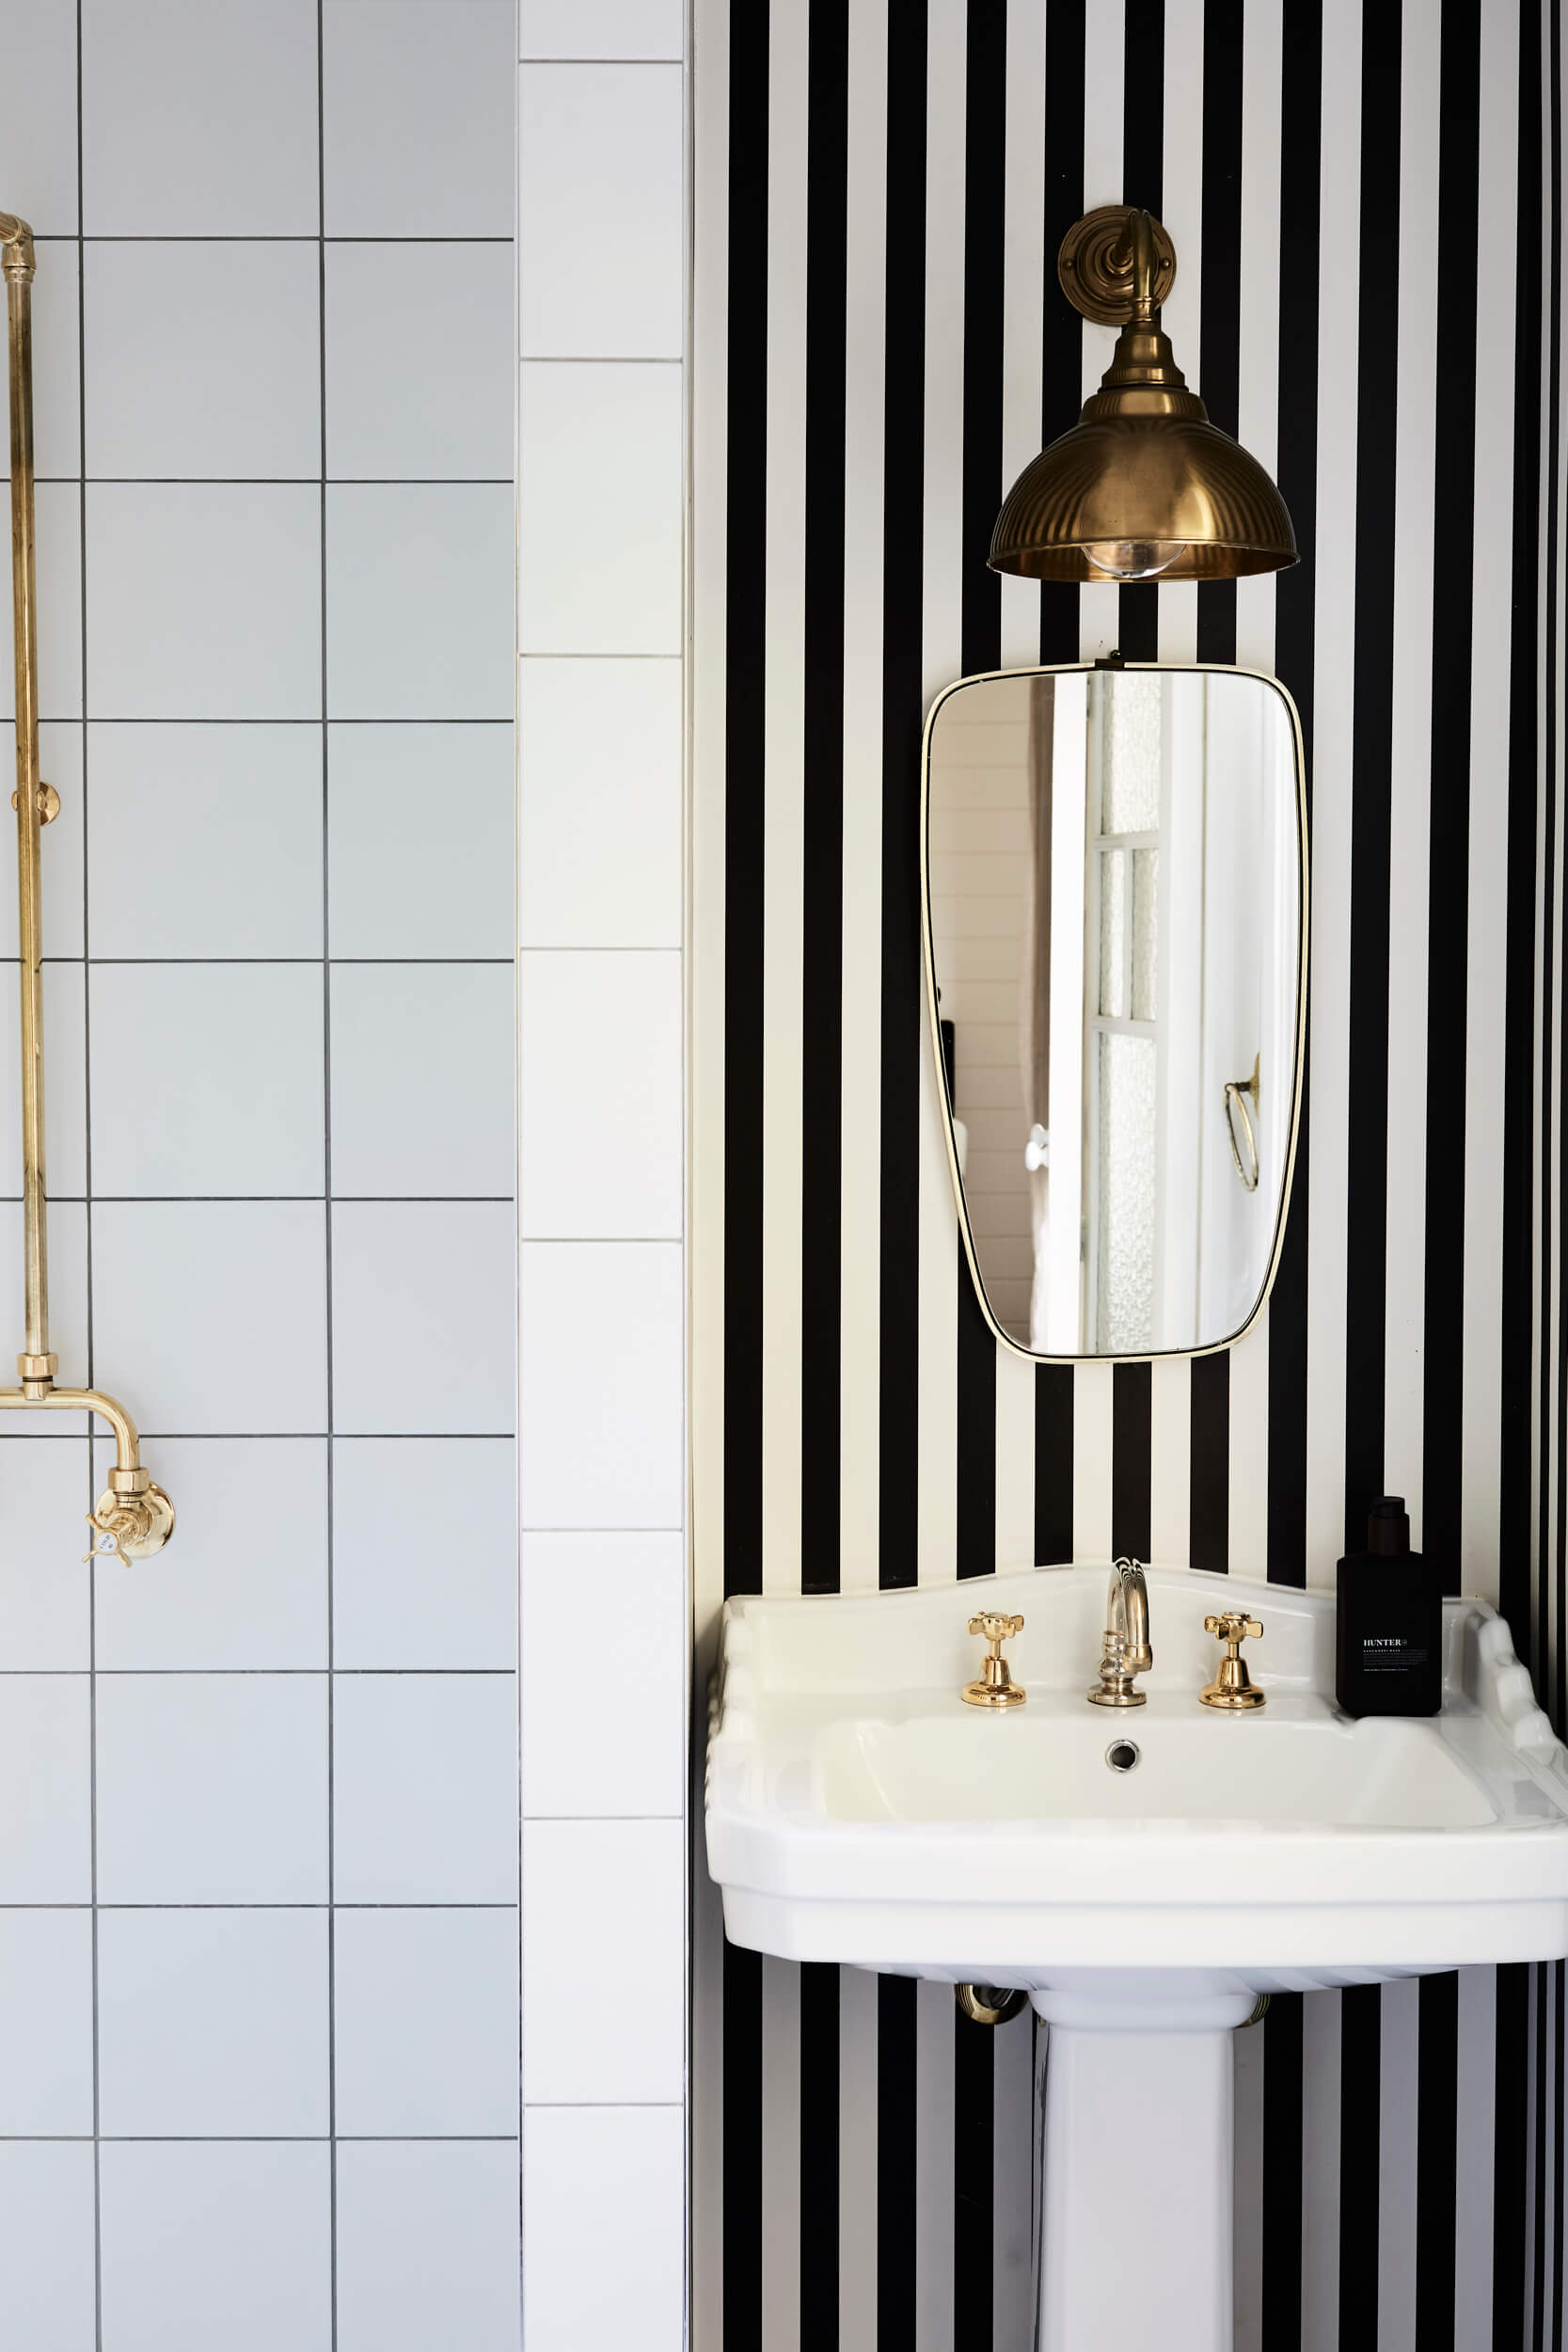 Ensuite at The Bower Cottage, The Bower Byron Bay with bold black and white striped wallpaper, vintage pedestal basin and brass fittings